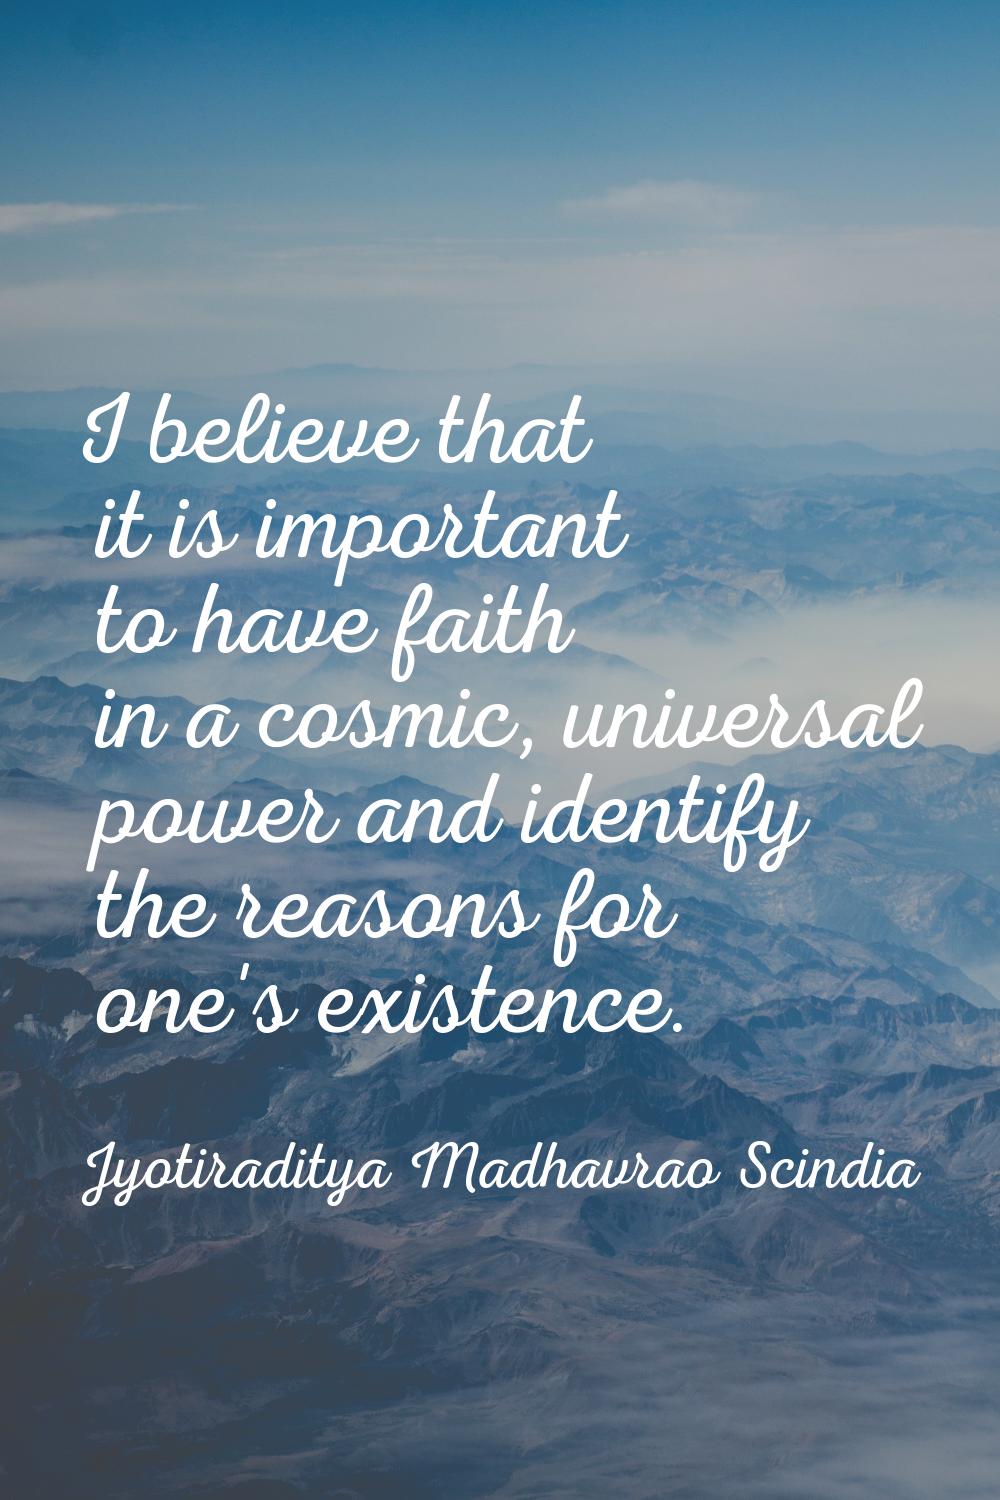 I believe that it is important to have faith in a cosmic, universal power and identify the reasons 